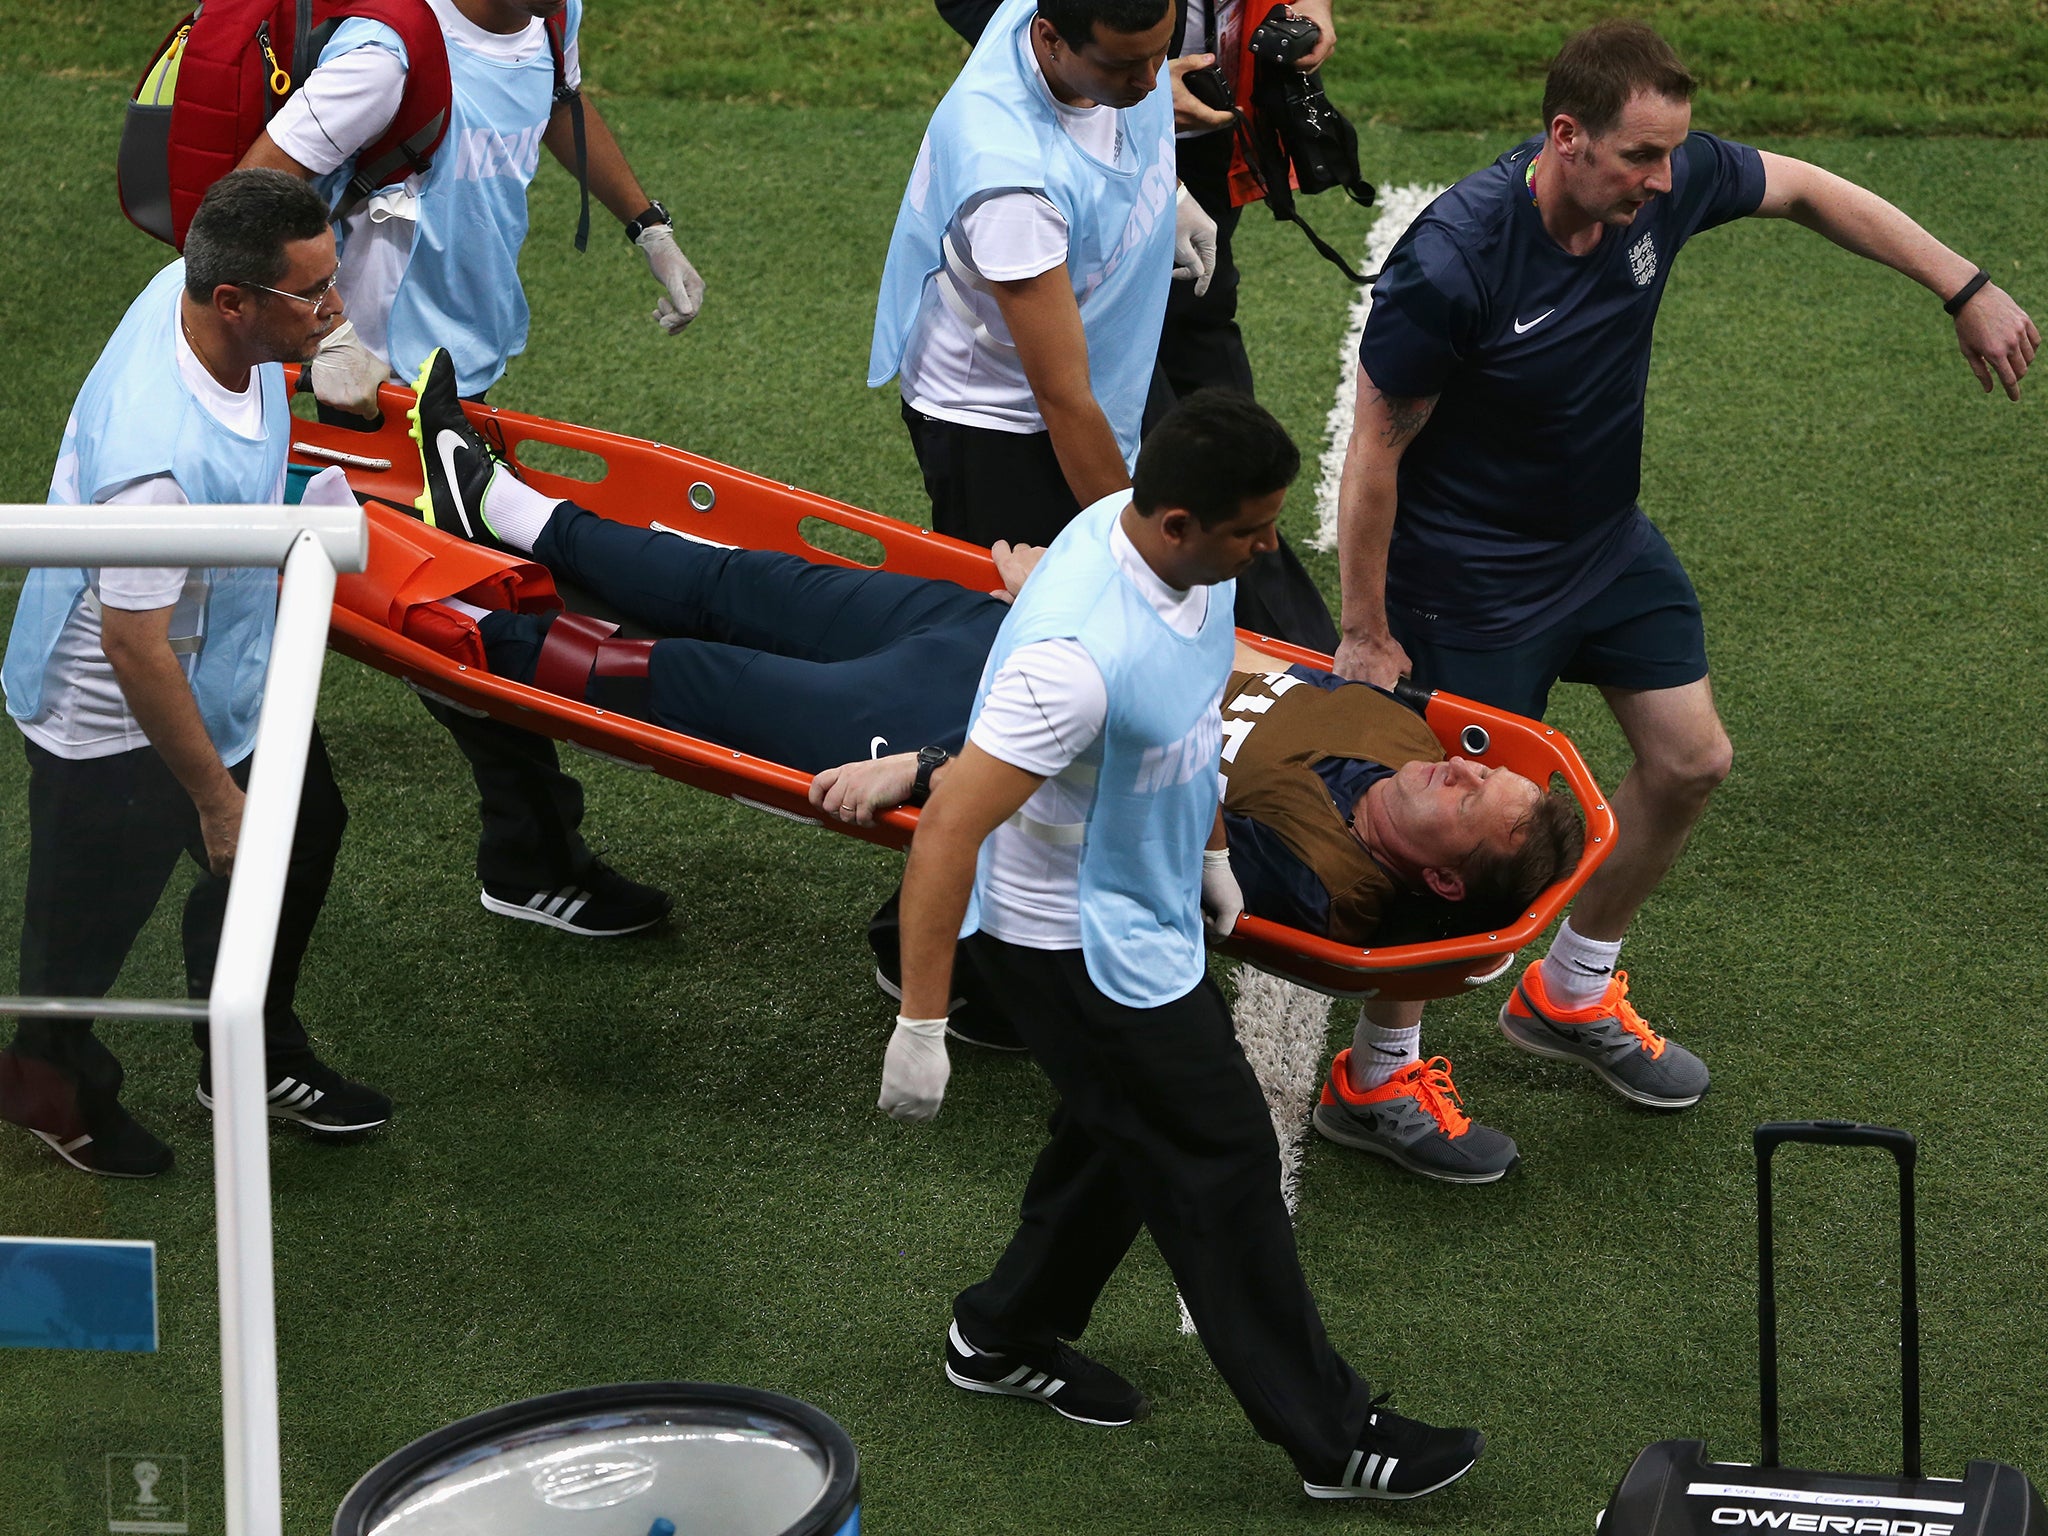 Physio Gary Lewin had to be stretchered off against Italy after dislocating his ankle landing on a water bottle as he celebrated England's goal